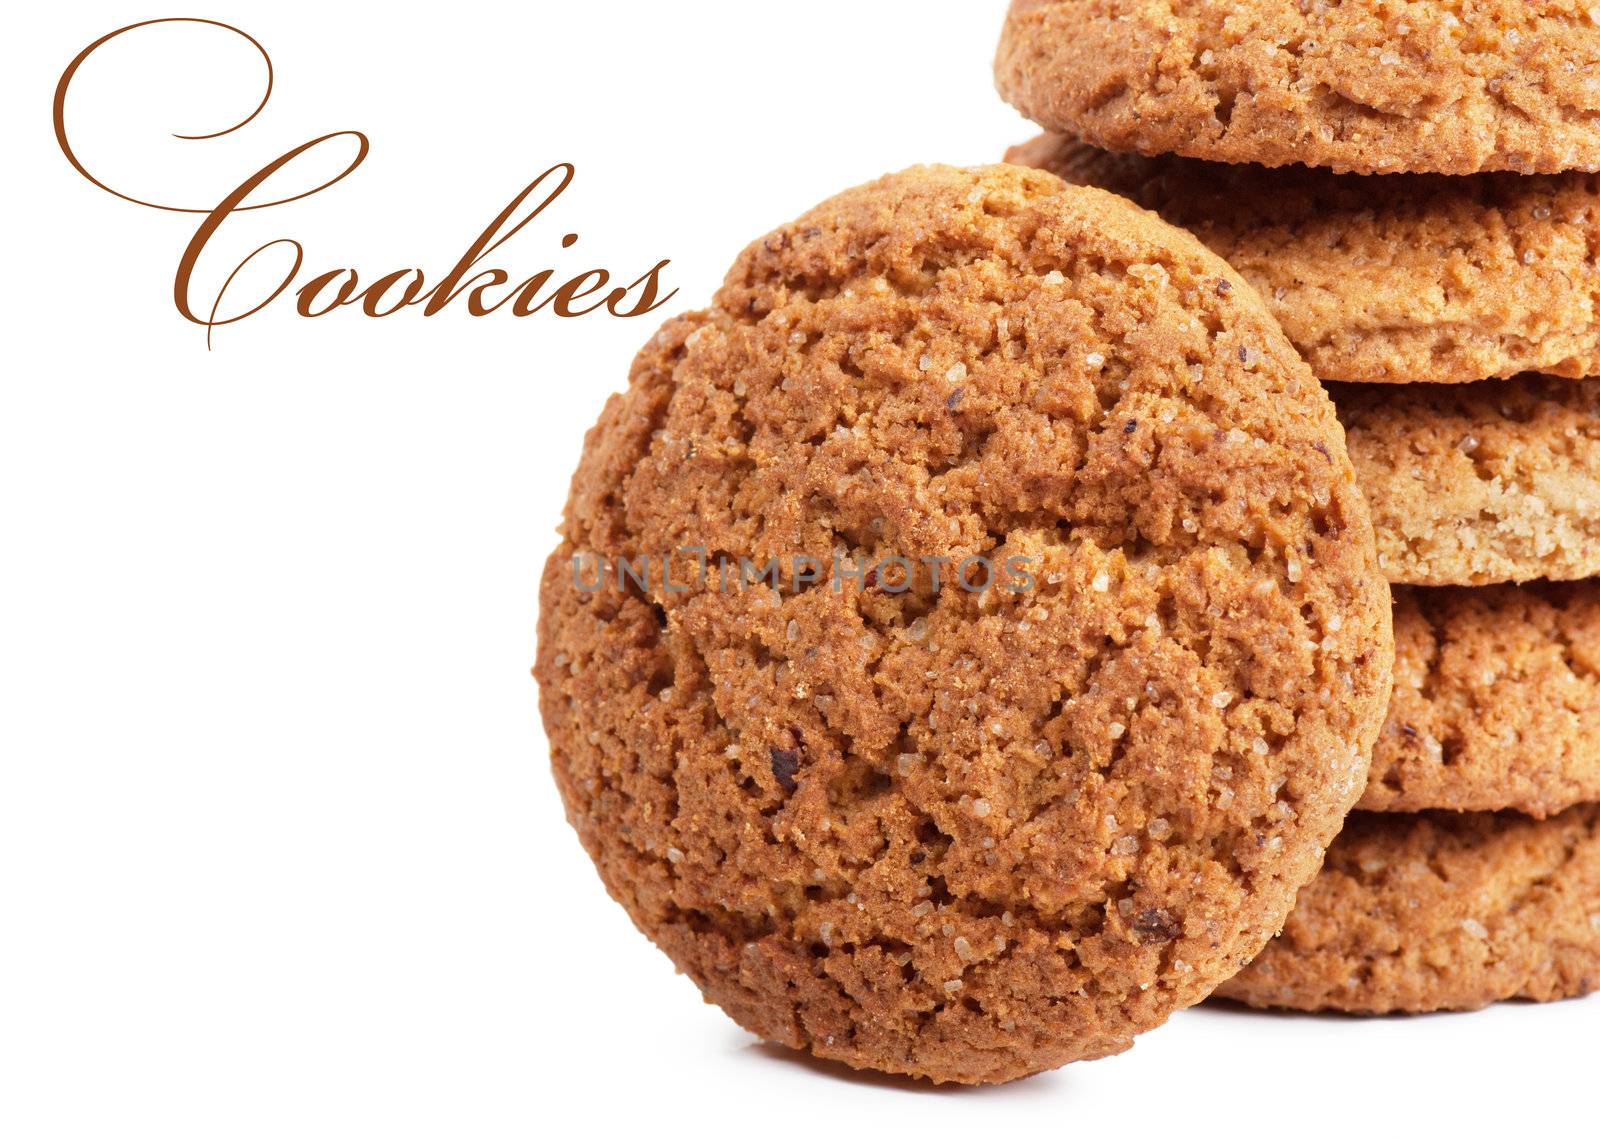 Closeup view of stack of oatmeal cookies over white background